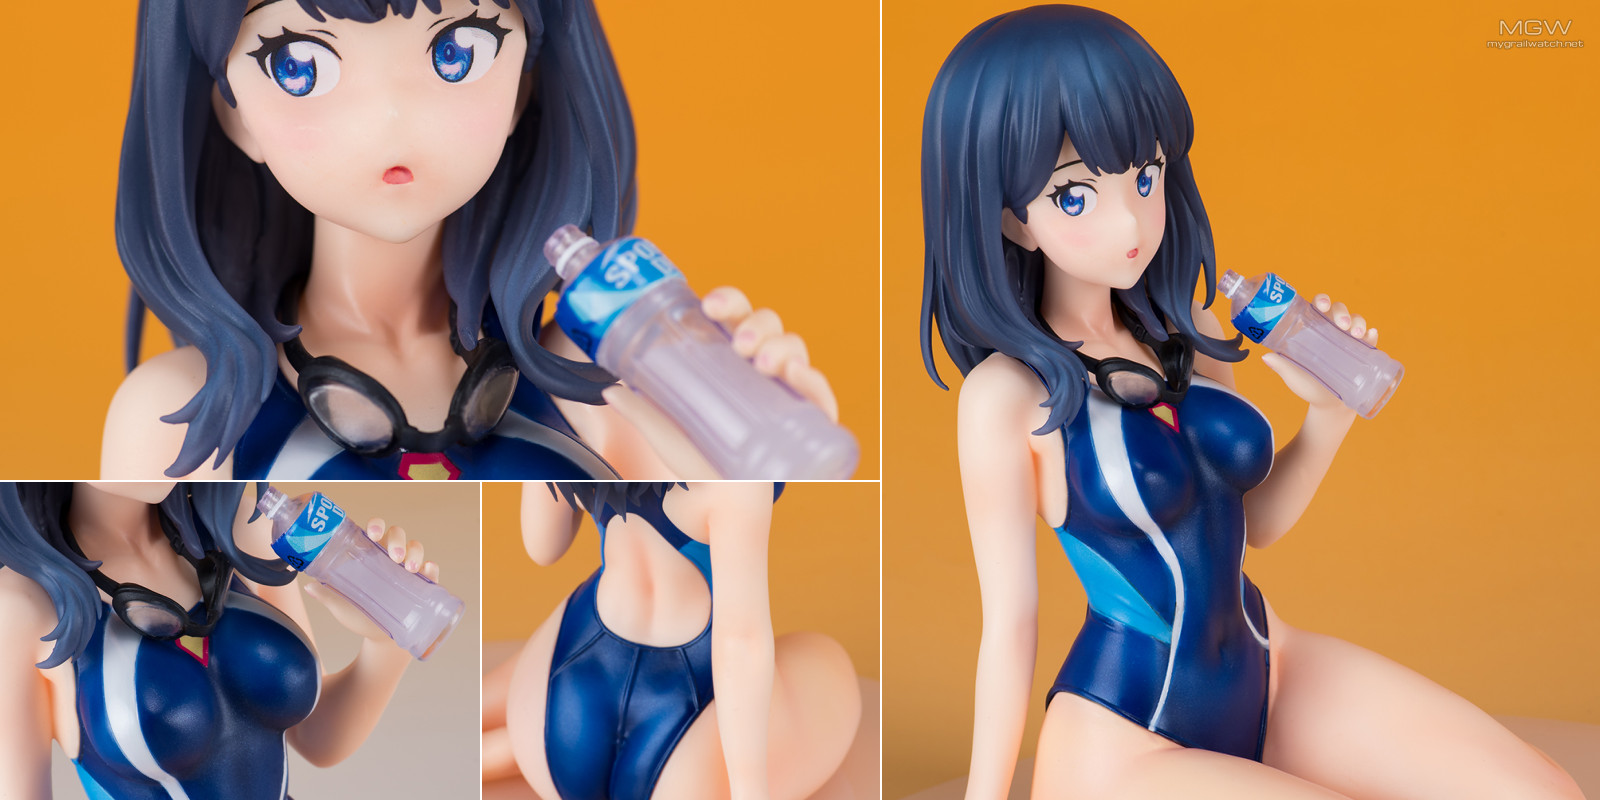 Takarada Rikka Competitive Swimsuit ver by FOTS Japan from SSSS.GRIDMAN